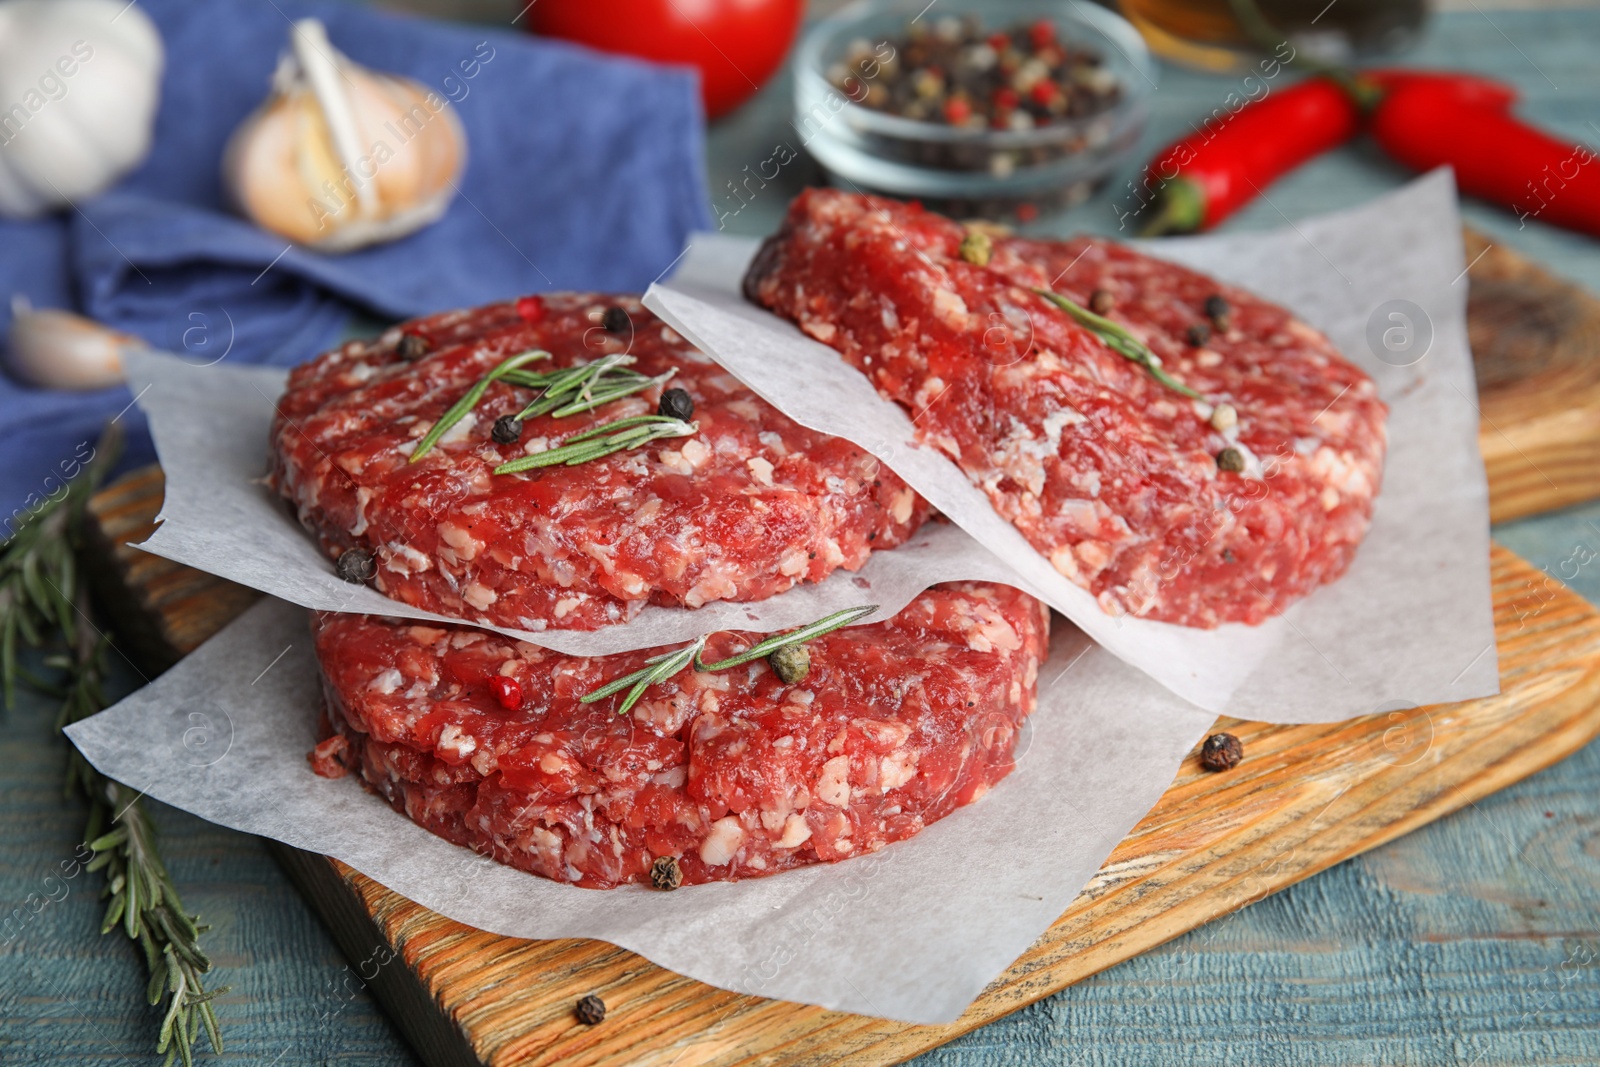 Photo of Raw meat cutlets for burger on blue wooden table